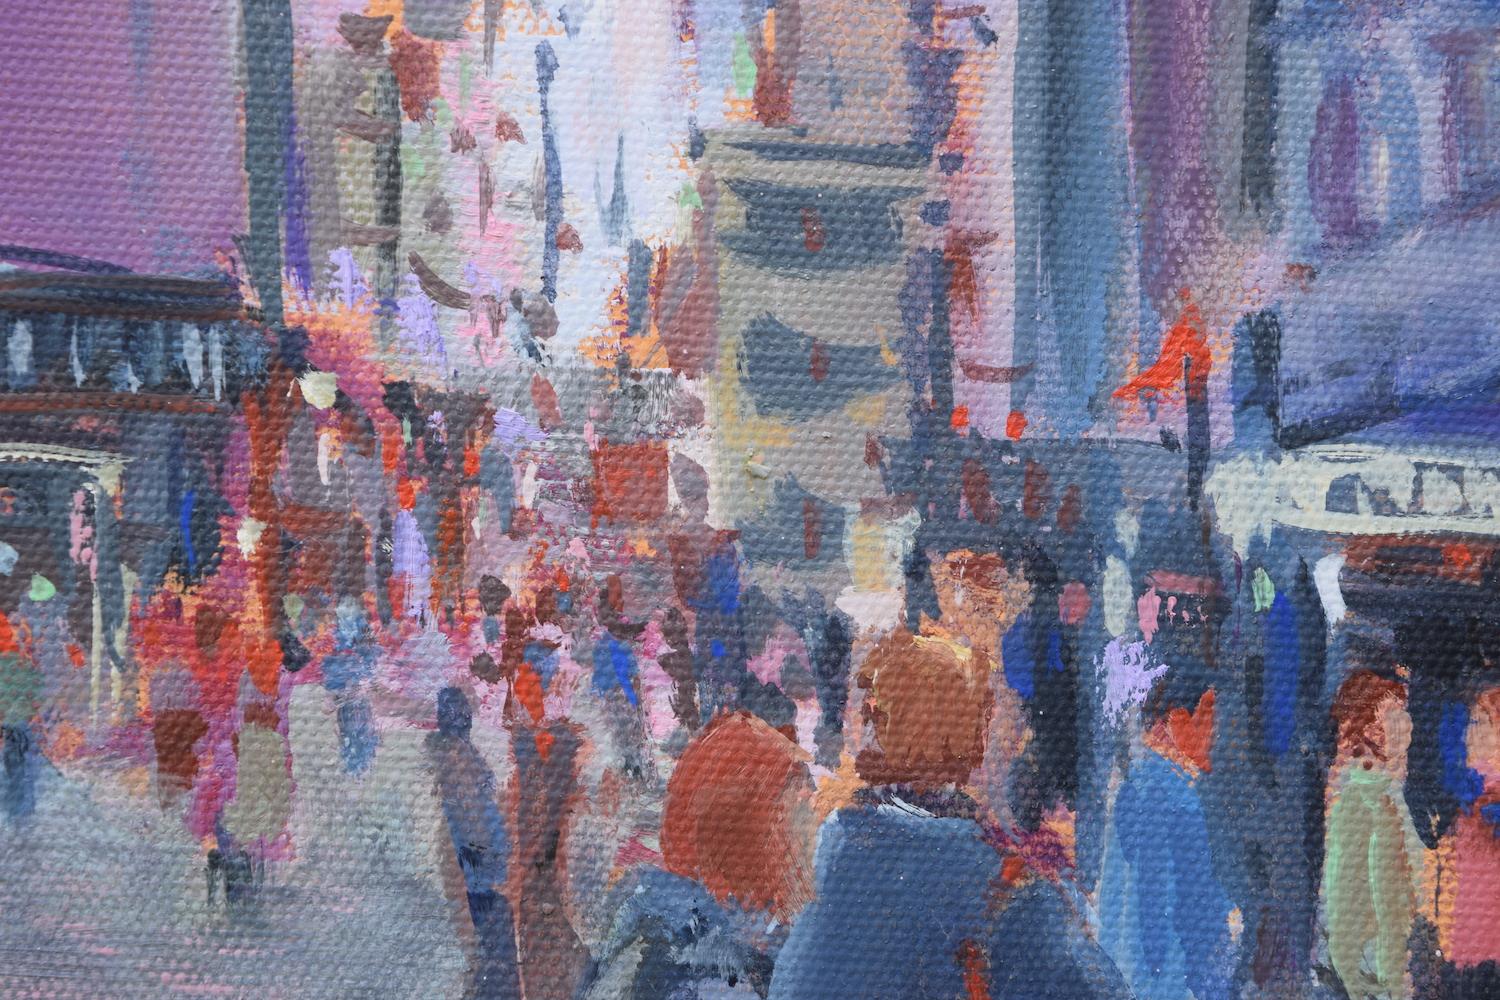 <p>Artist Comments<br>Artists Mickey Cunningham envisions a bustling cityscape with pedestrians enjoying the cool afternoon. She pictures the people wandering to and fro the festive fashion district. A pink overcast tints the sky complementing the